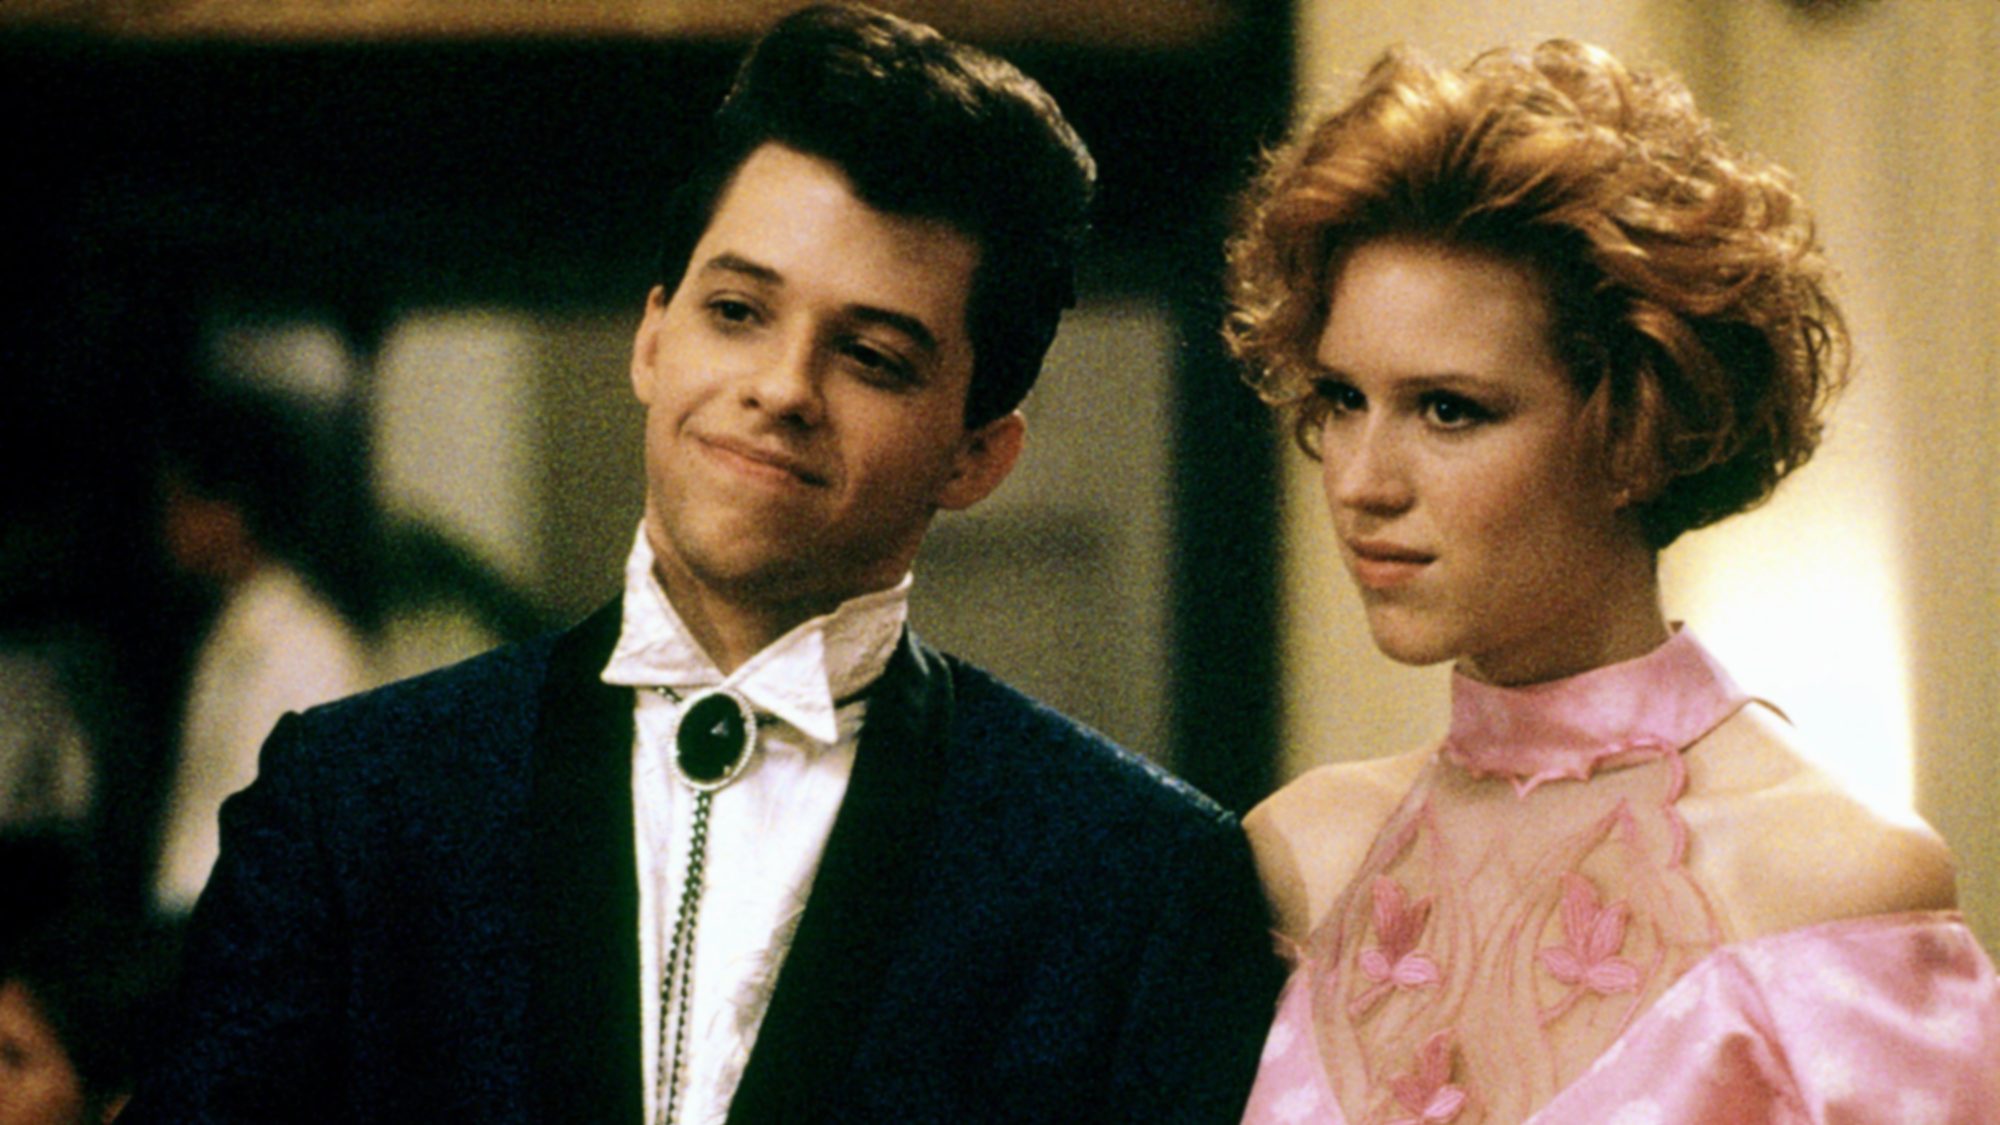 Jon Cryer and Molly Ringwald in Pretty in Pink